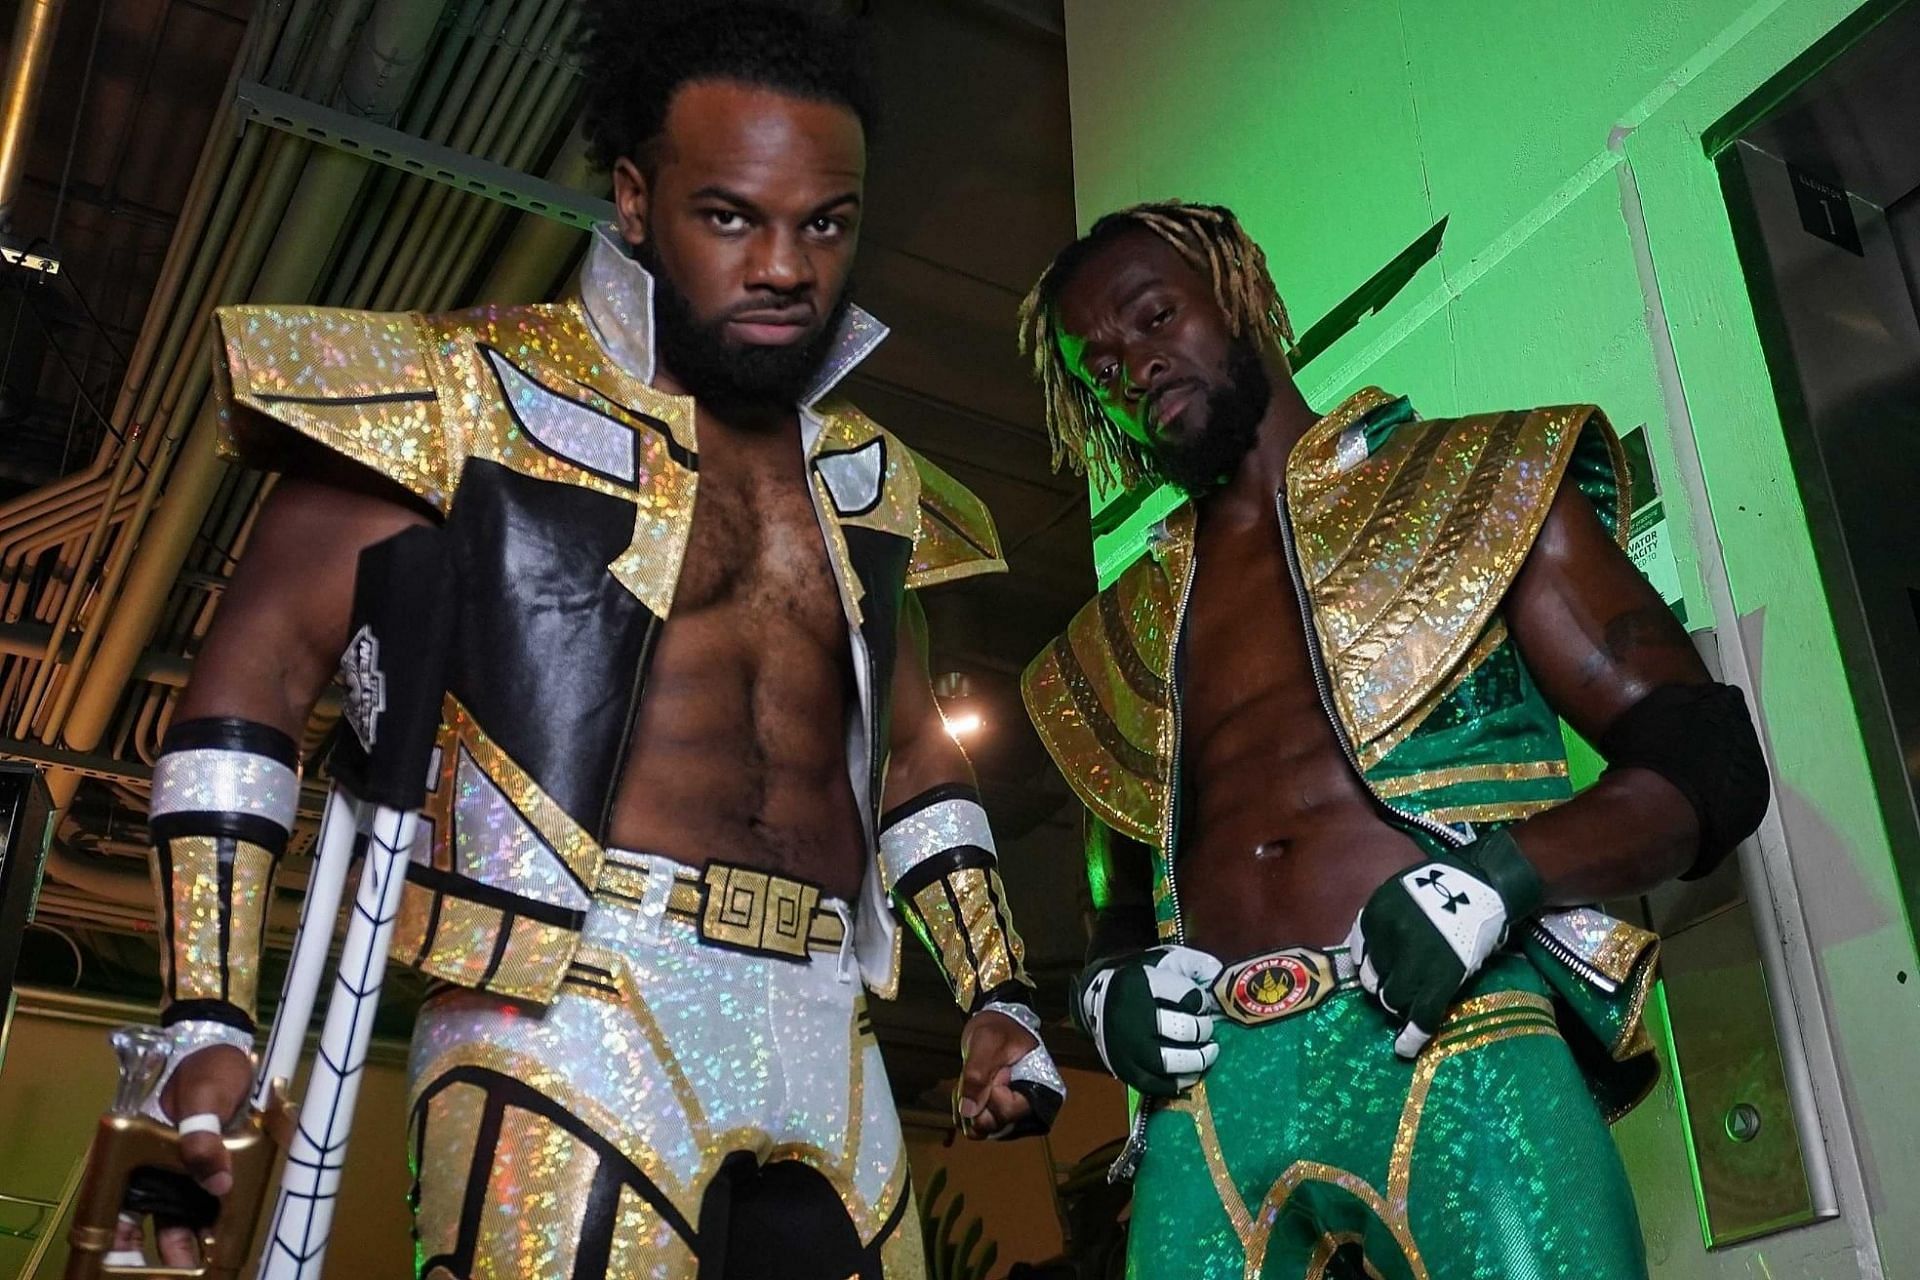 The New Day are one of the greatest tag teams in WWE